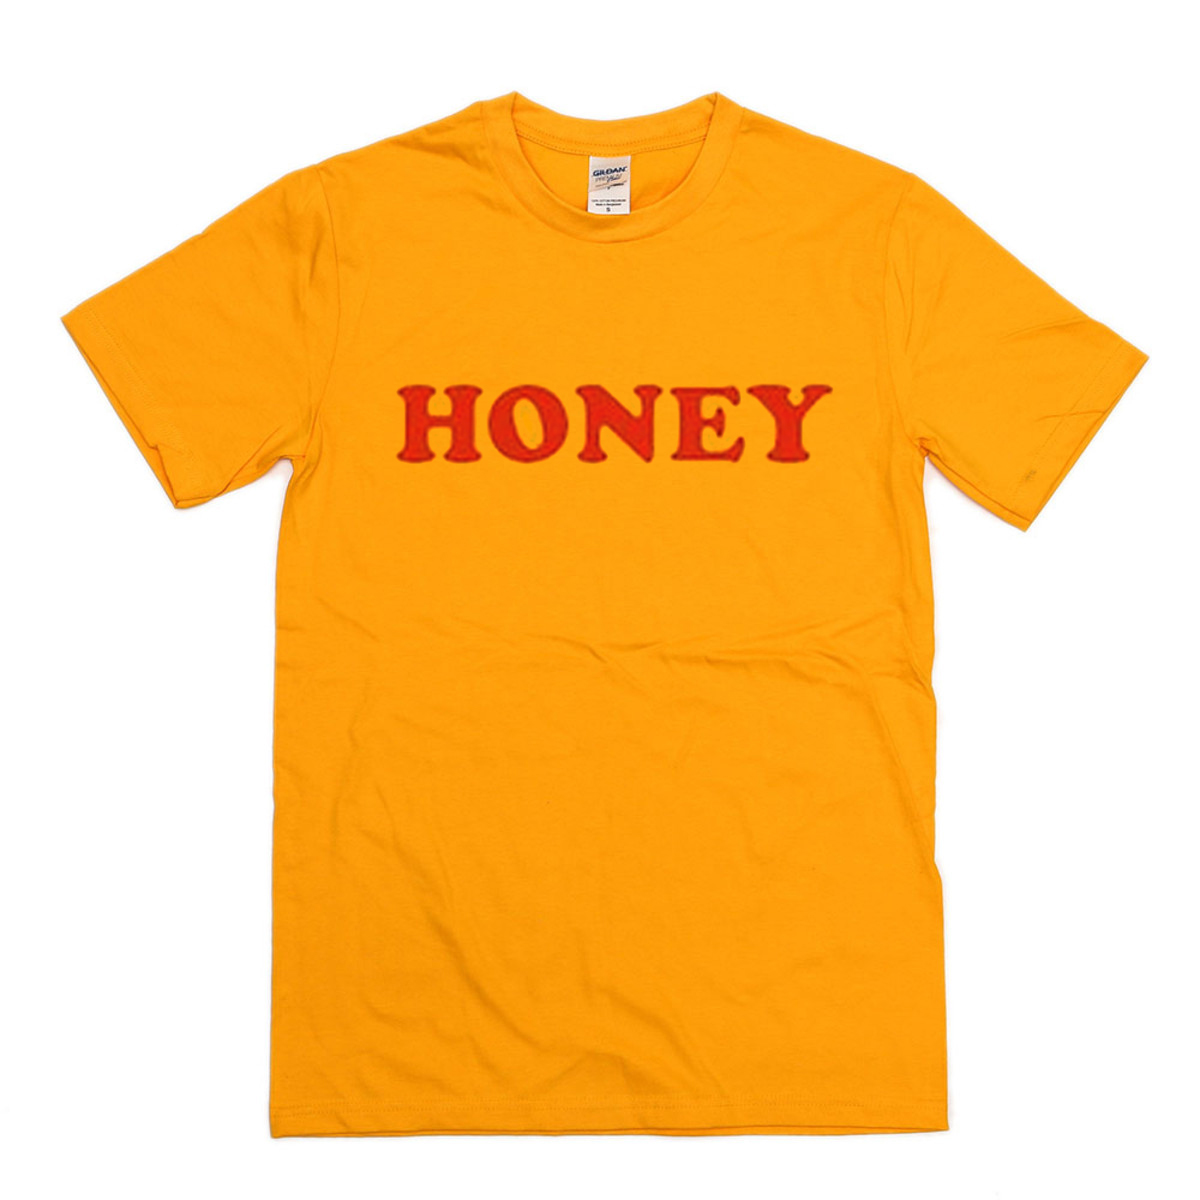 Honey Yellow t-shirt - epiclothes